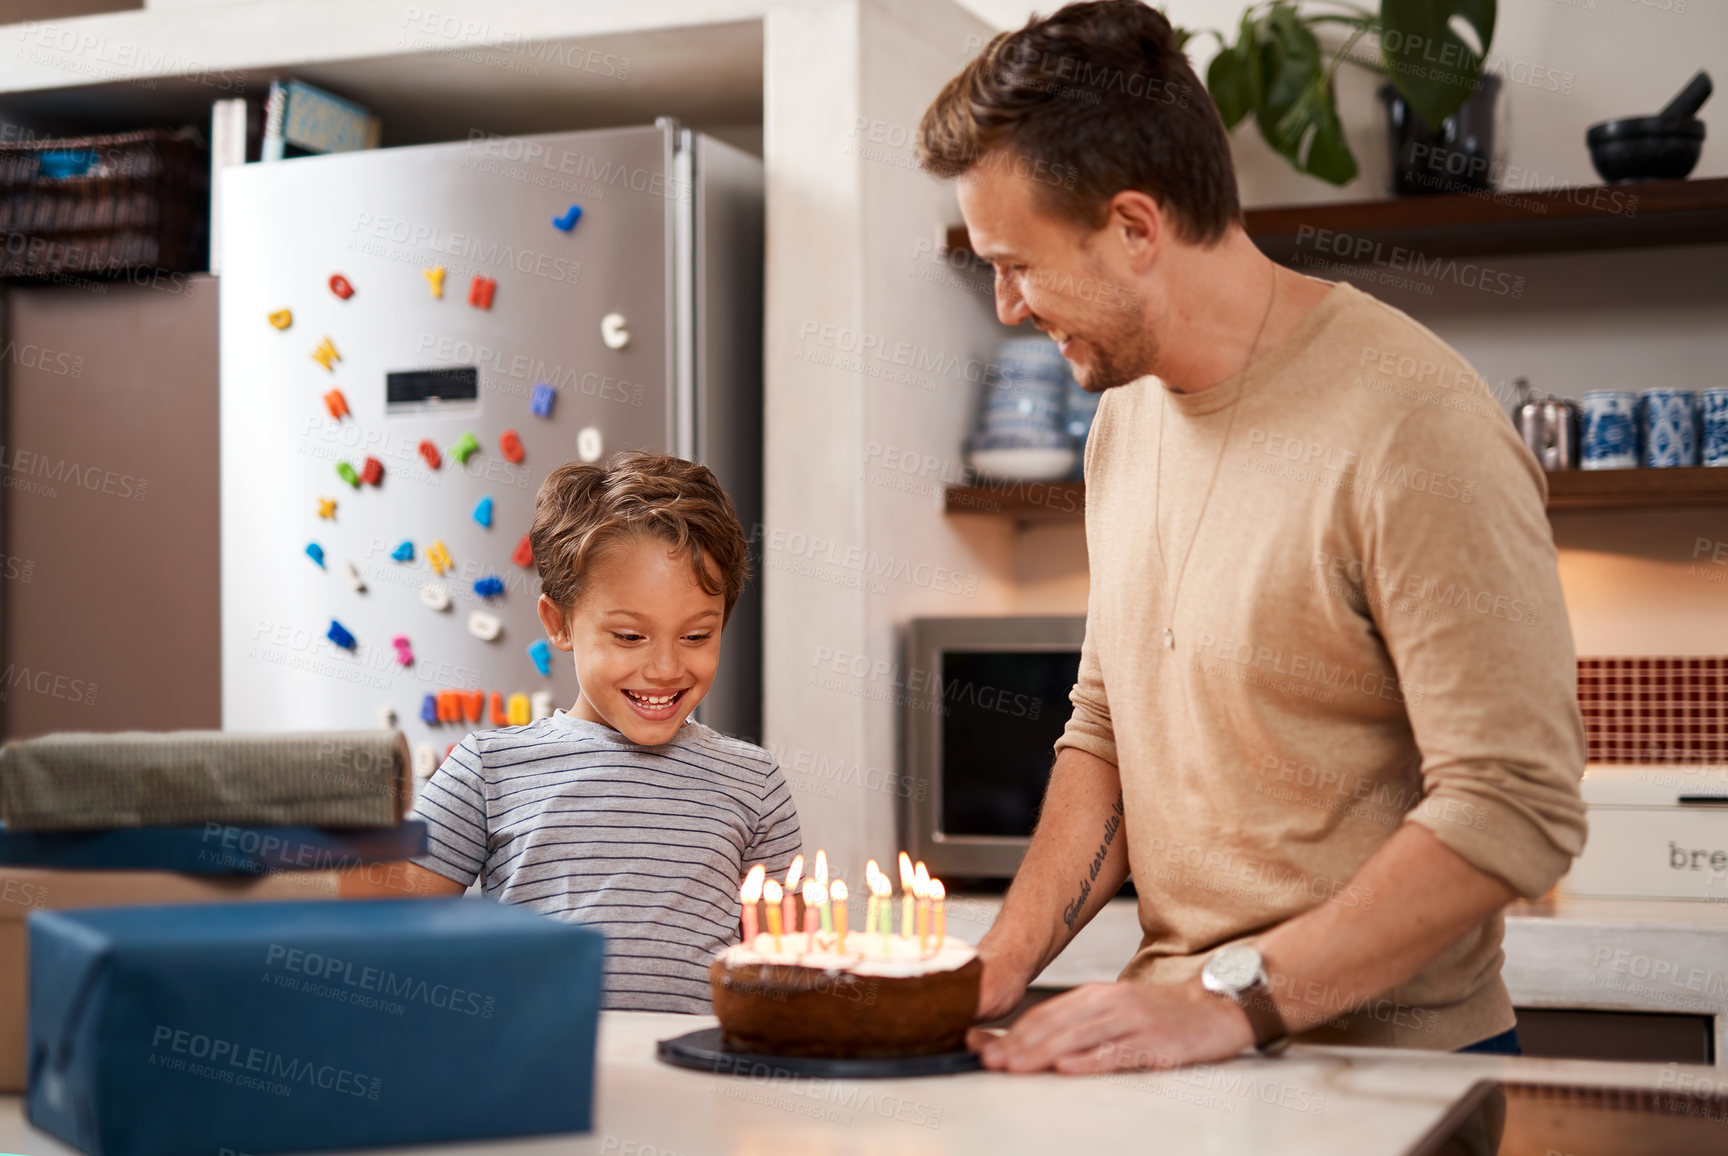 Buy stock photo Shot of a young boy looking happy while celebrating his birthday with his dad